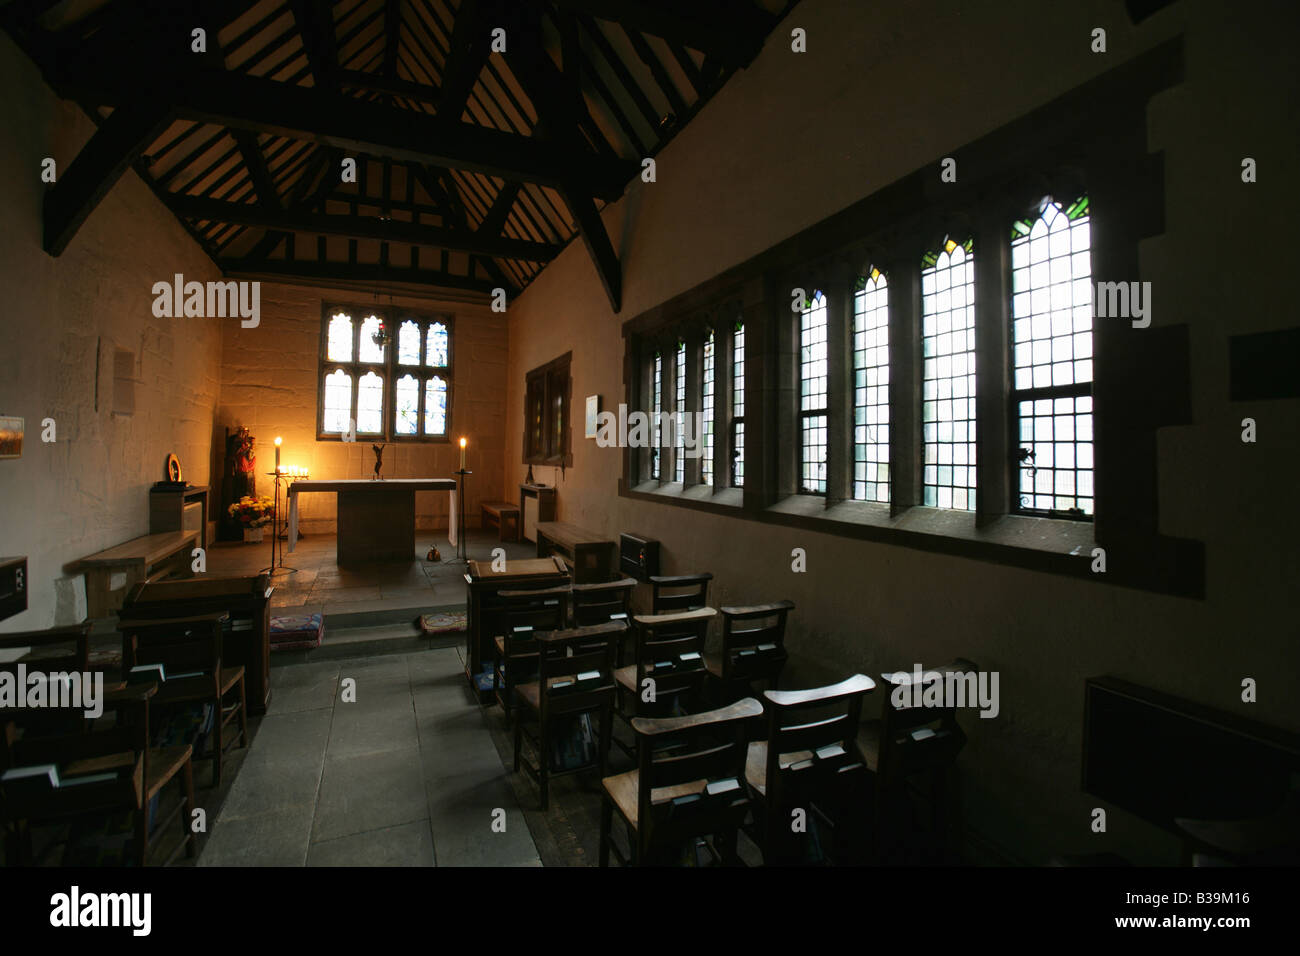 City of Derby, England. Internal view of the Chapel of St Mary on the Bridge at Derby’s St Mary’s Bridge. Stock Photo